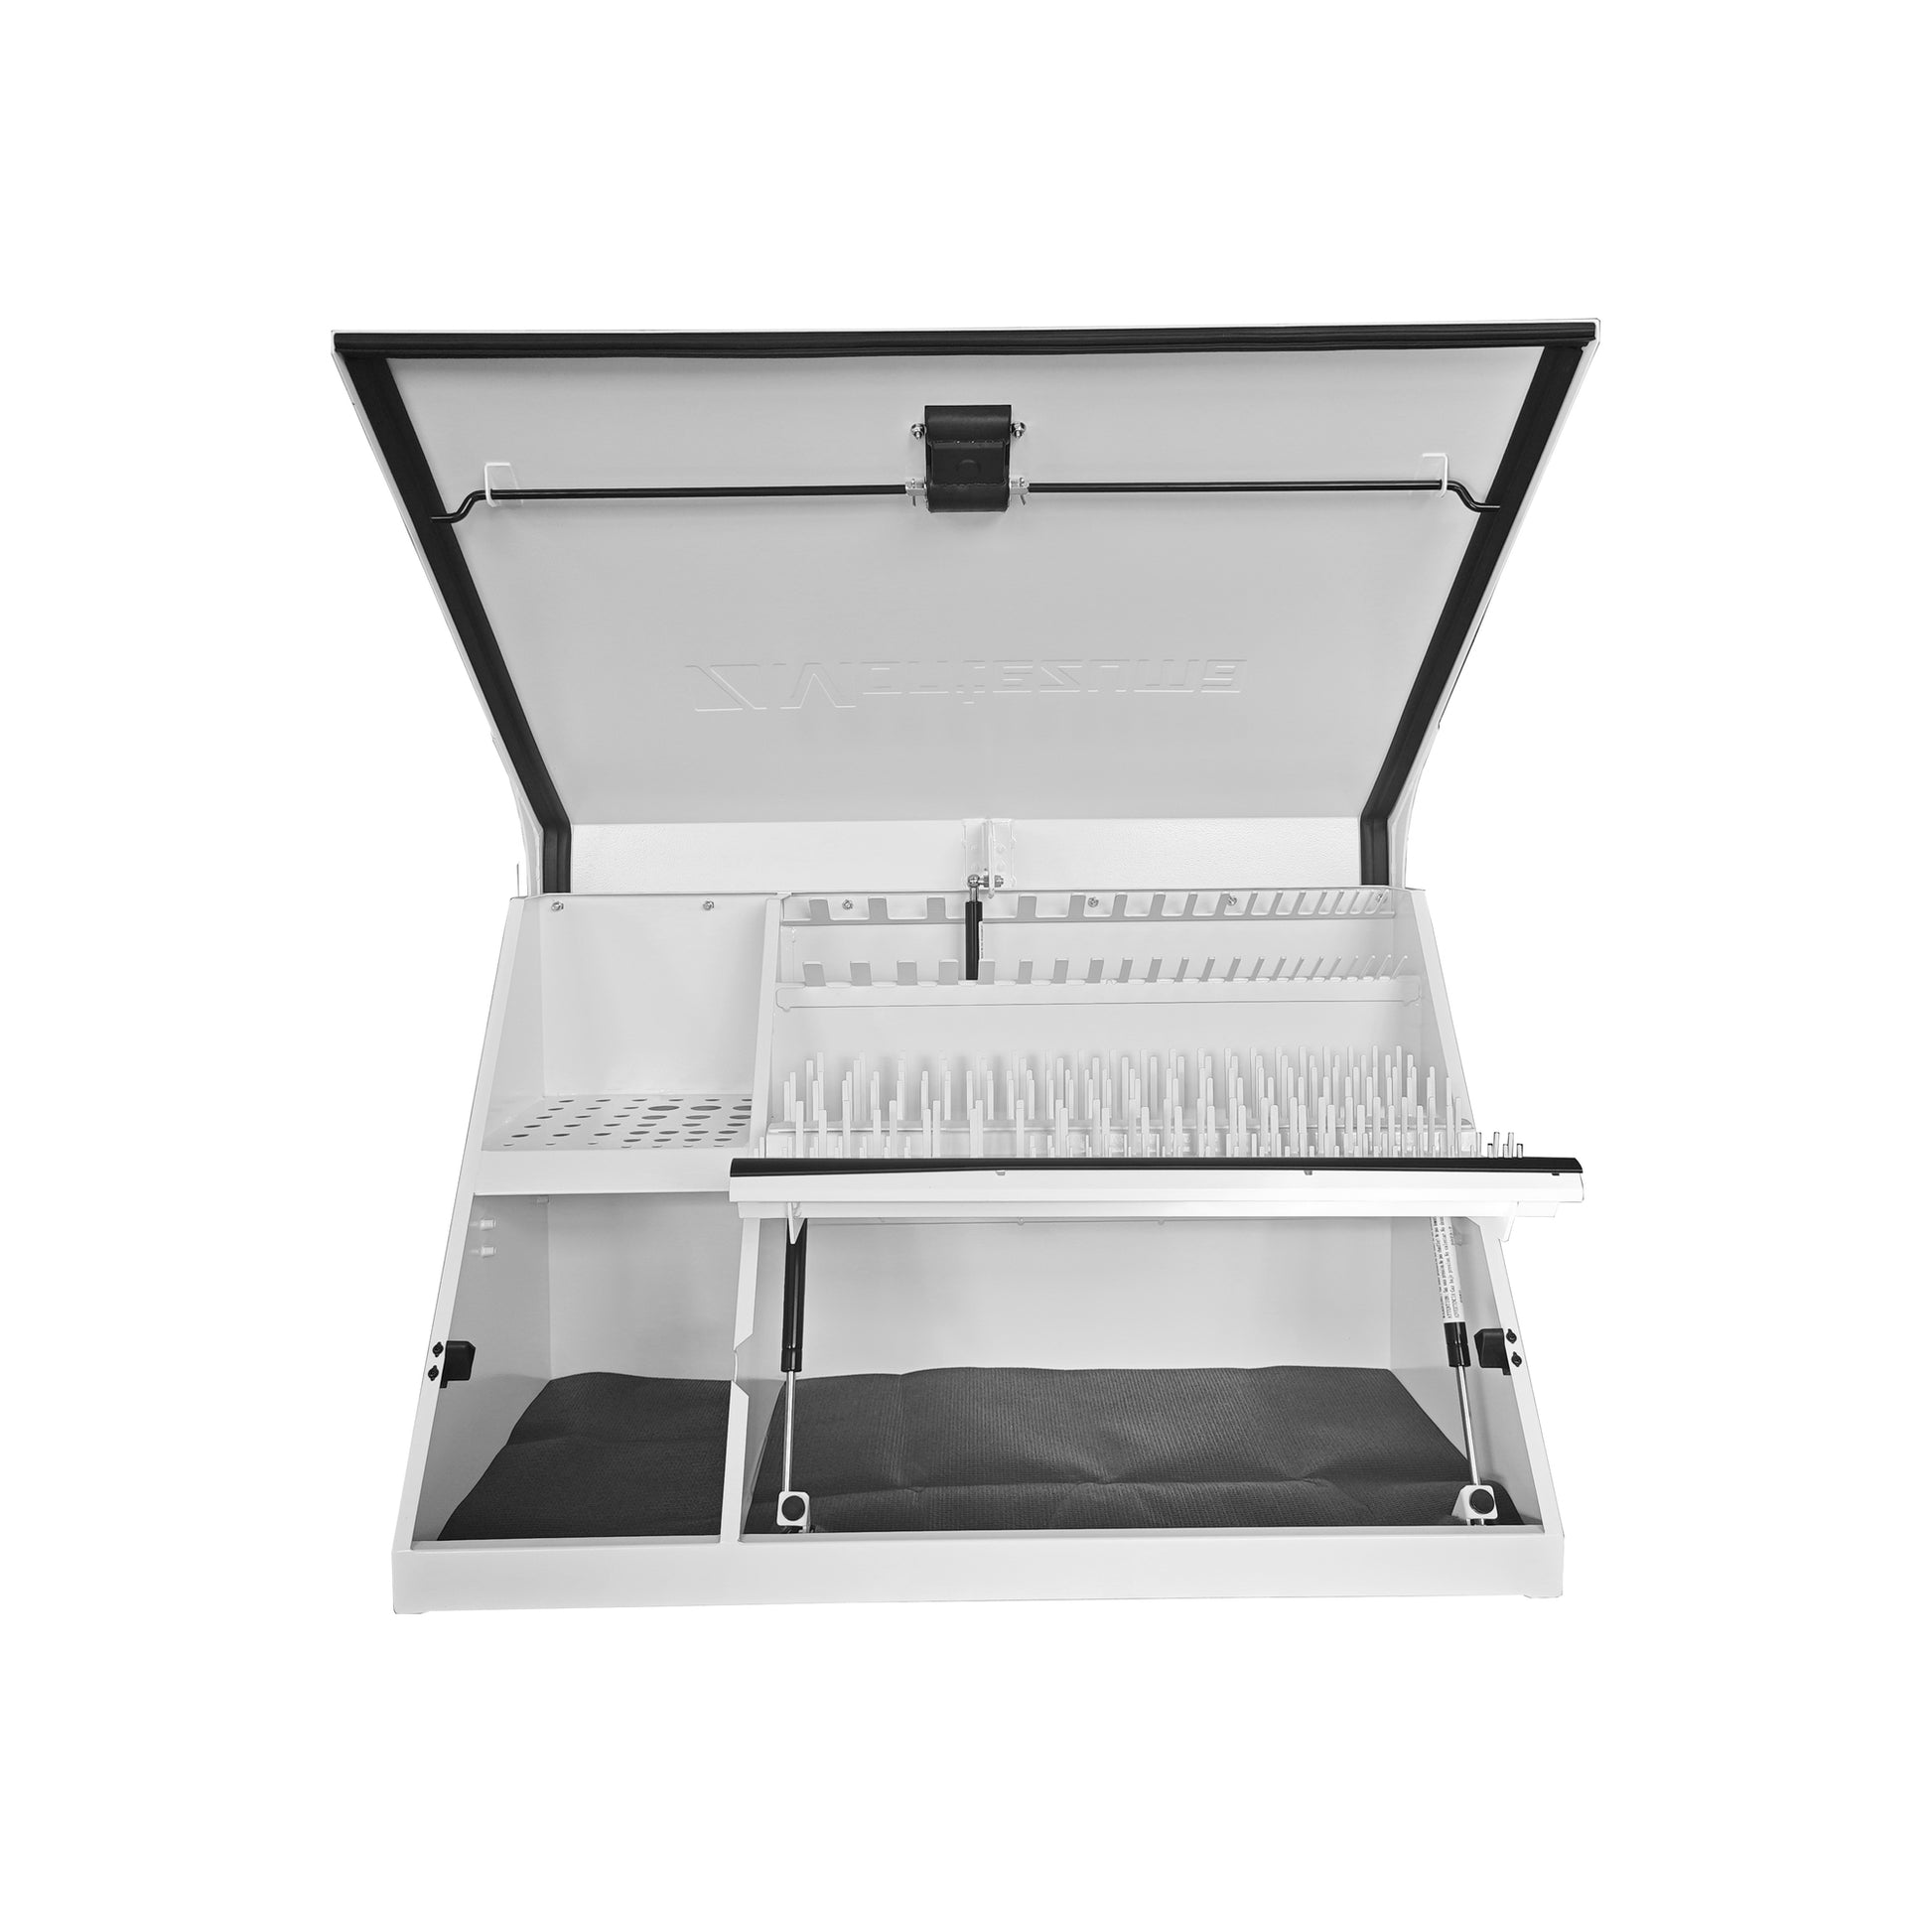 steel-triangle-toolbox-xl450-white w/ black accents-1